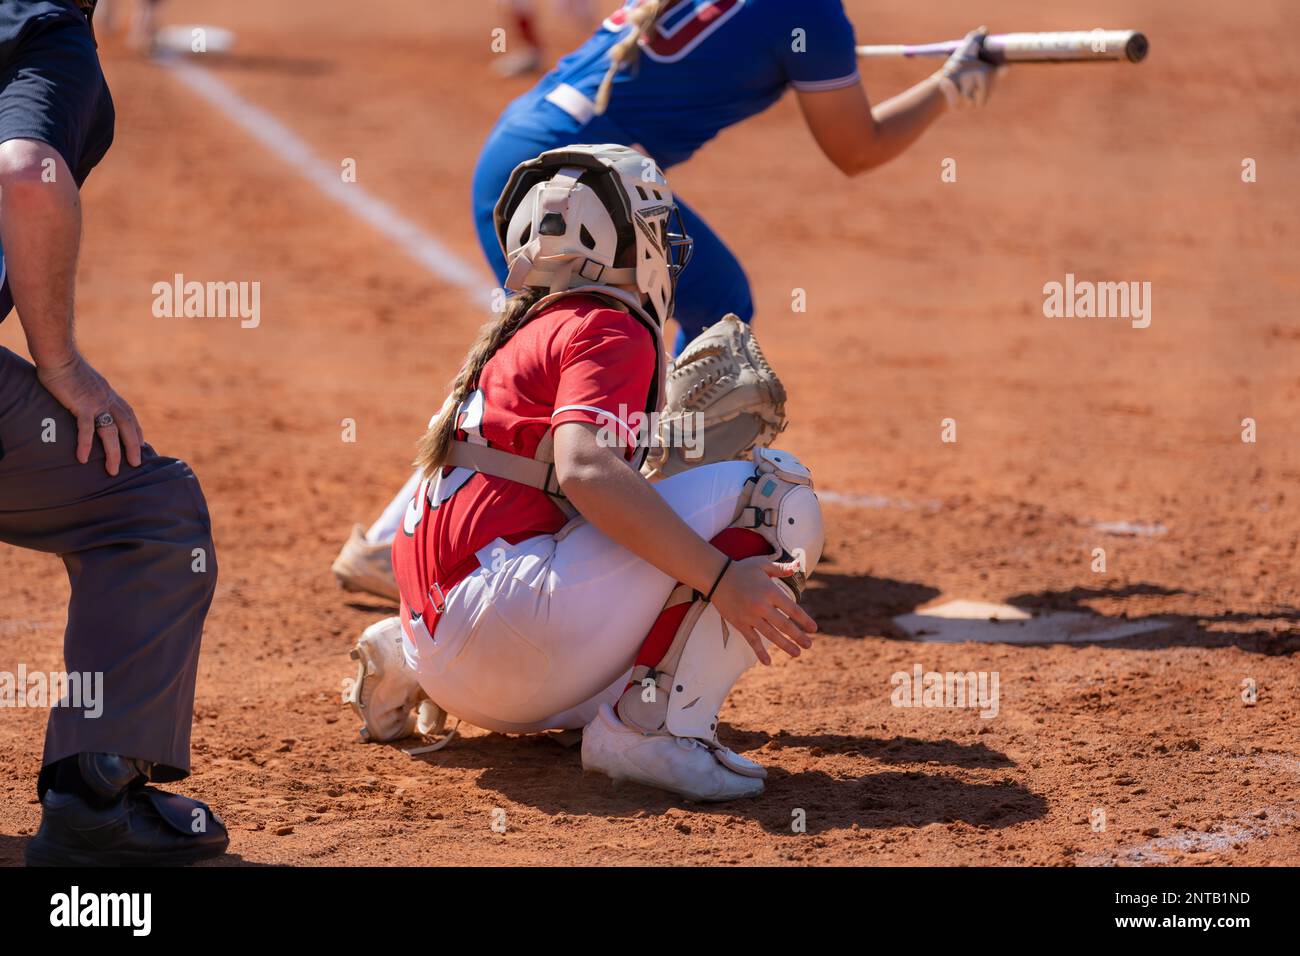 Fastpitch softball catcher with batter attempting a bunt. Stock Photo